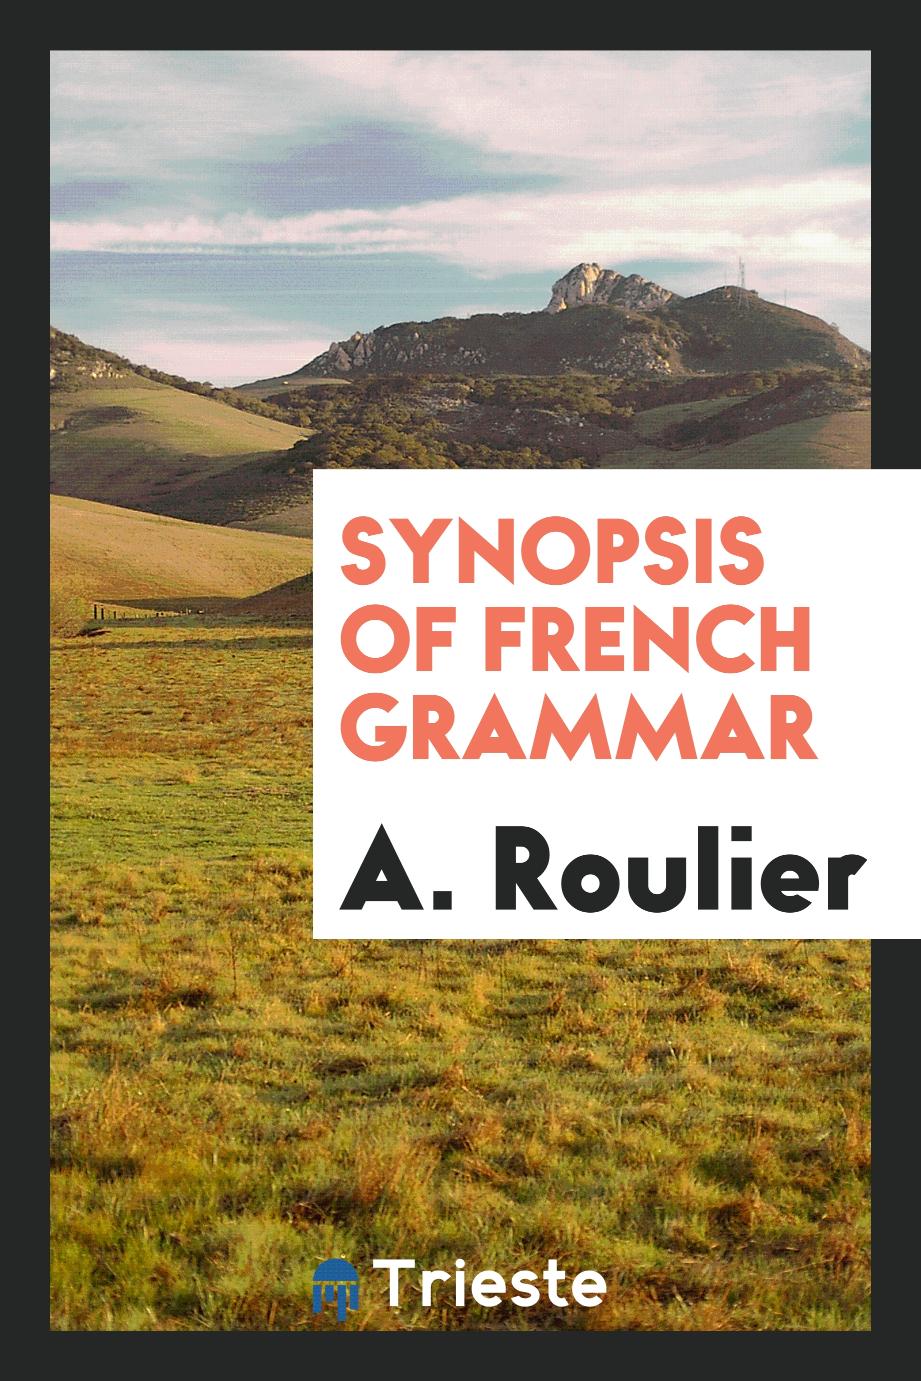 Synopsis of French grammar